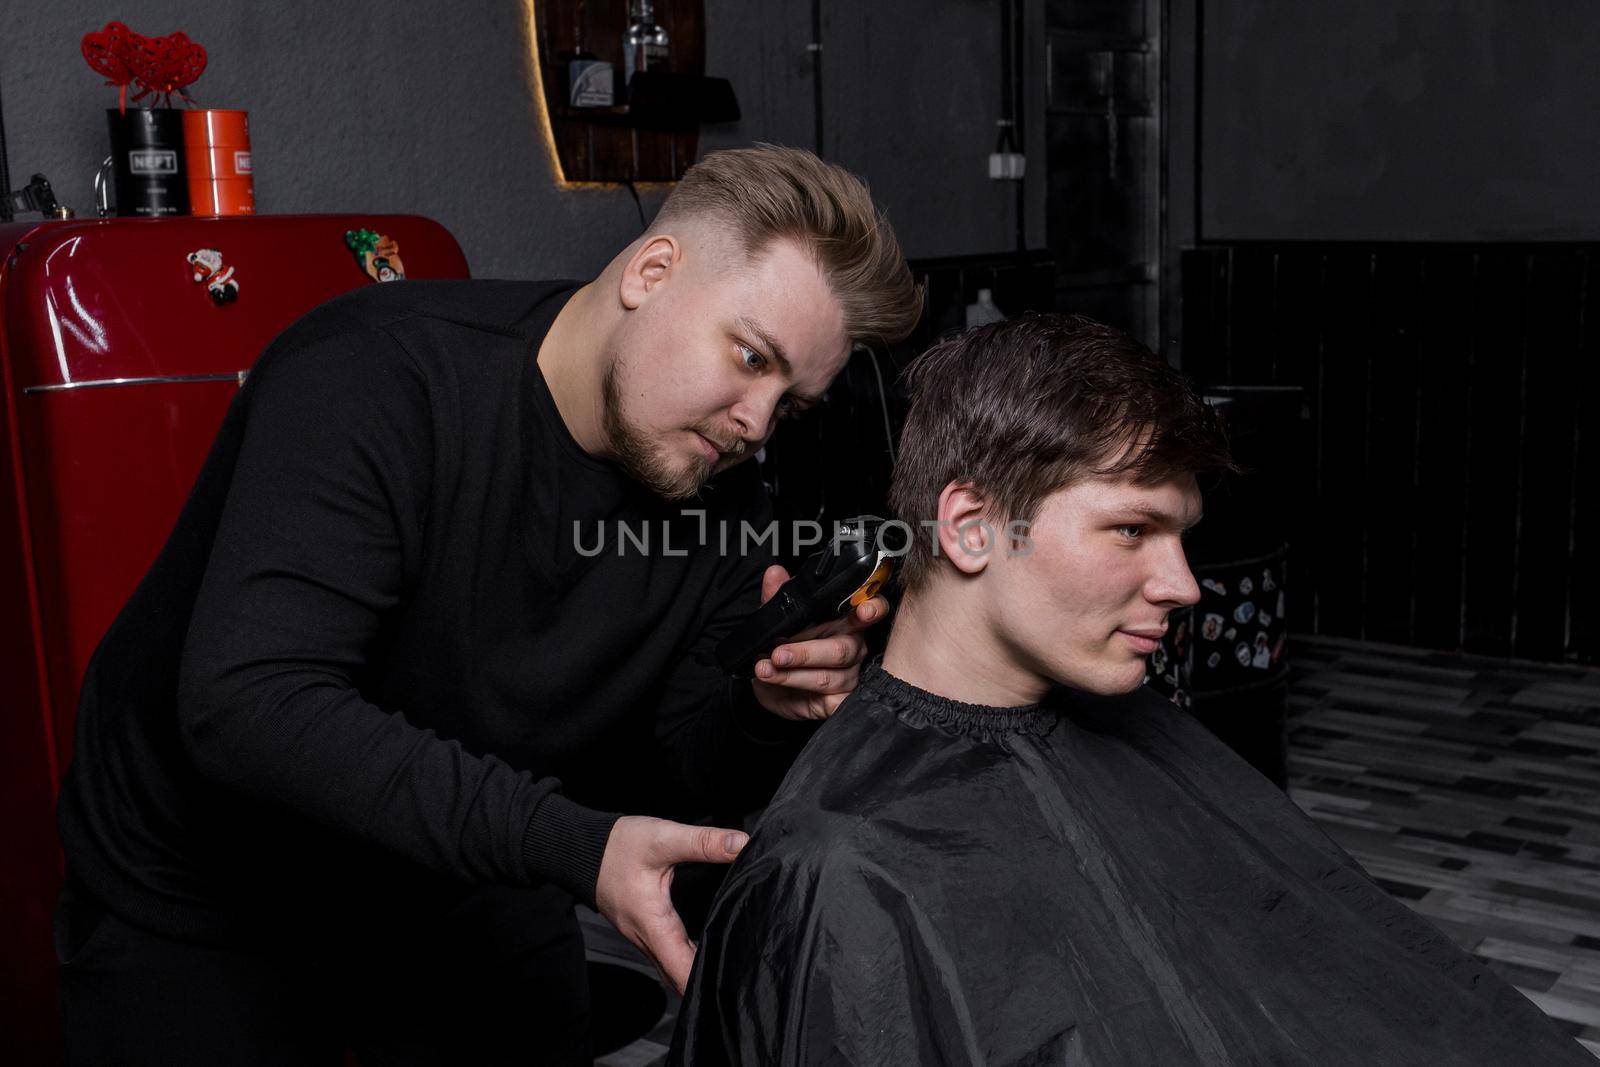 Barber European looking man hairdresser cuts the client with dark hair. Hairdressing by AYDO8